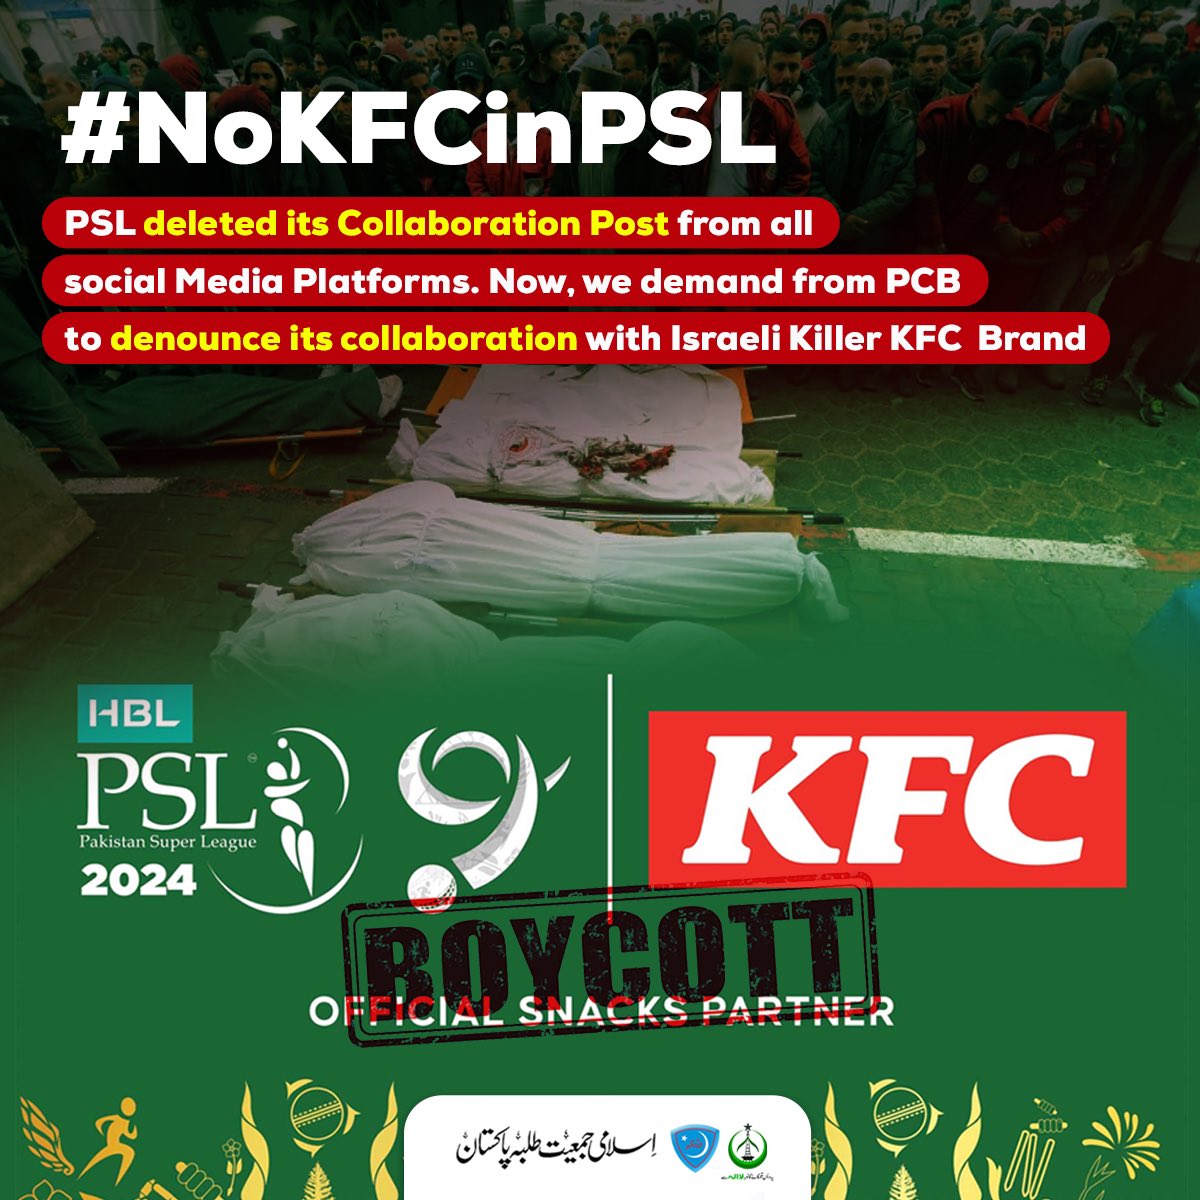 Pakistan Super League @thePSLt20 has deleted its Collaboration Post from all social media Platforms. Now, we demand from @TheRealPCB to denounce its collaboration with Israeli Killer KFC Brand. #NoKFCinPSL #BoycottPSL